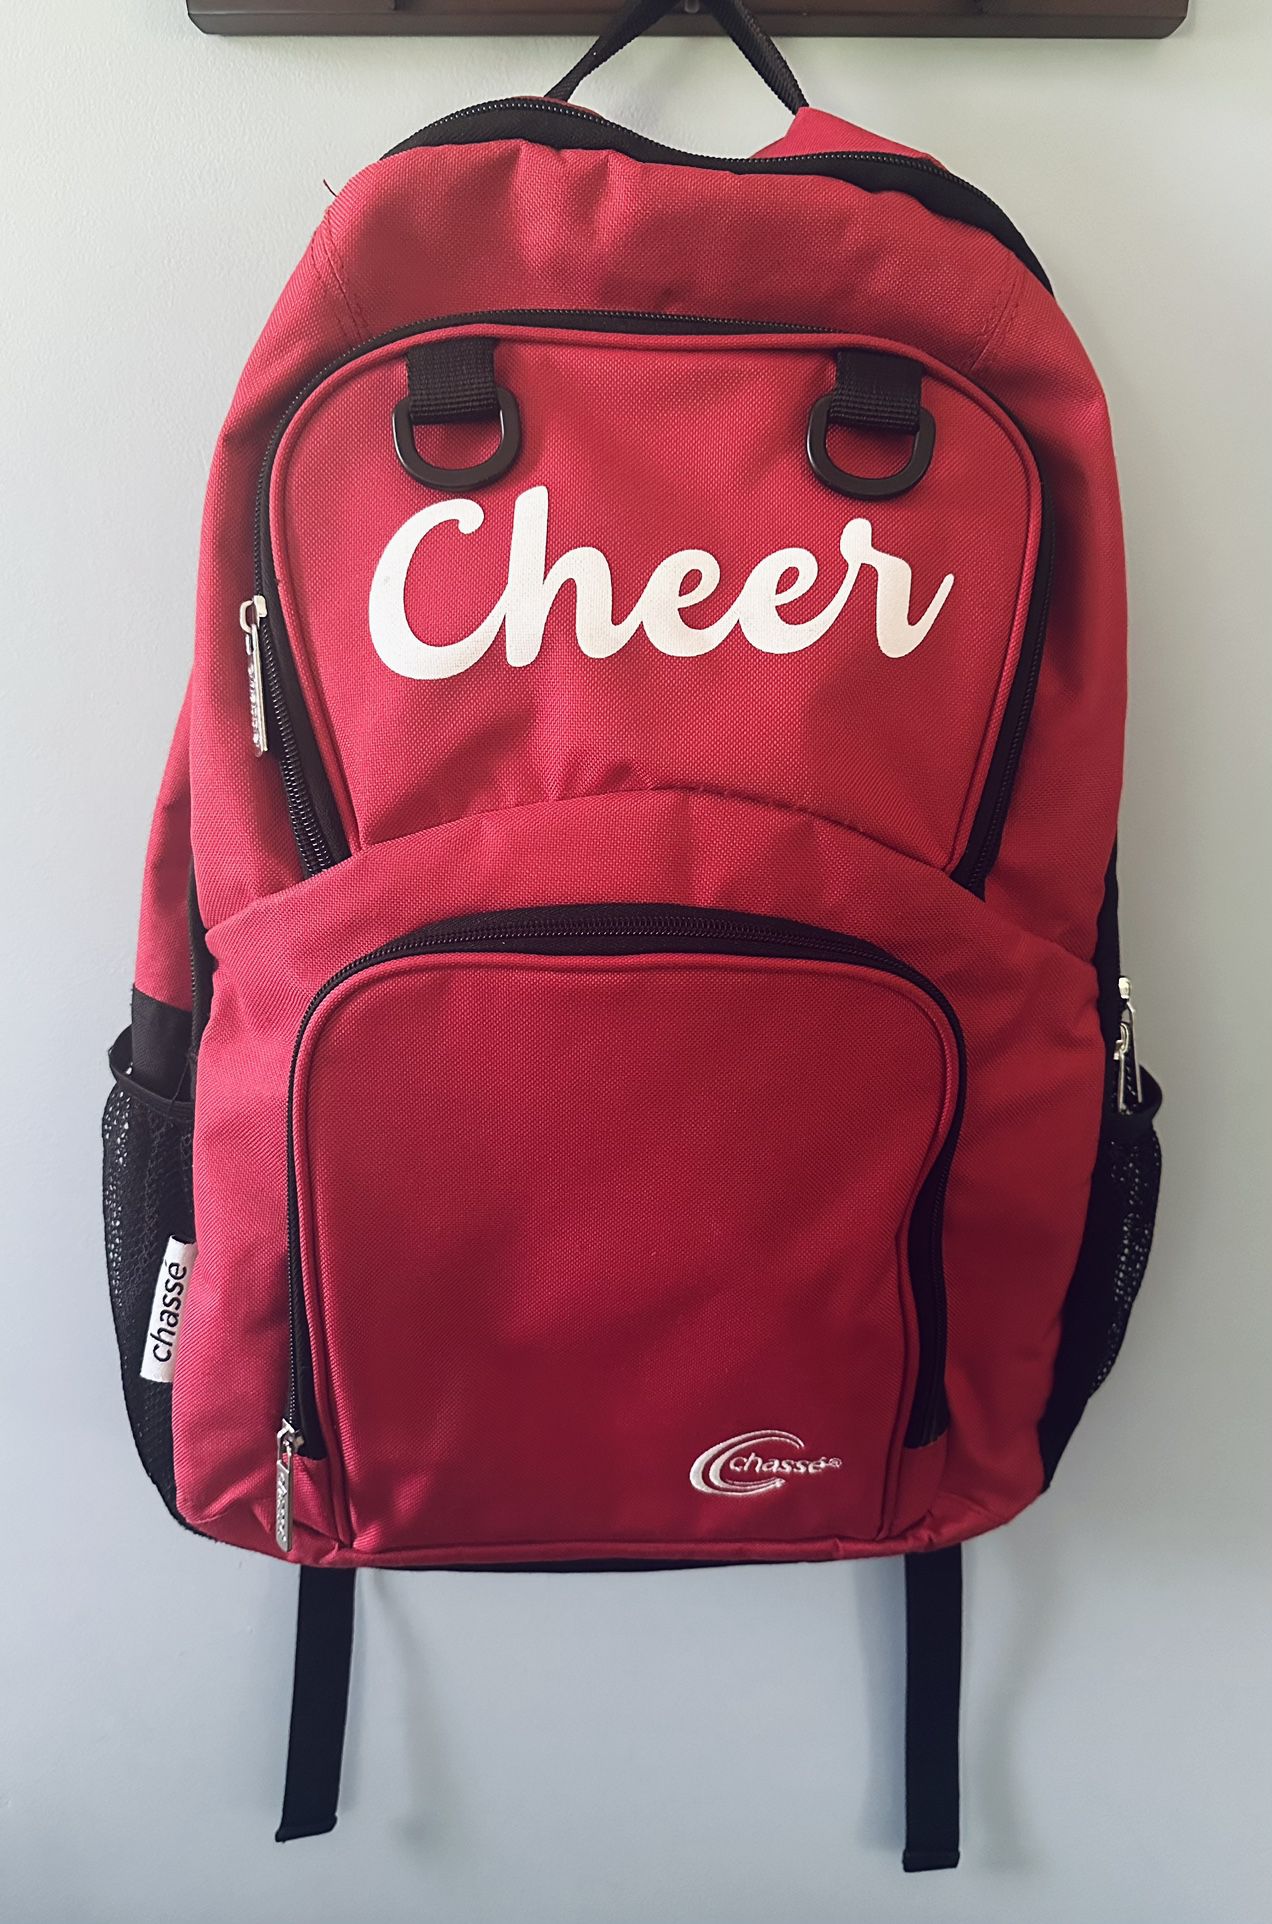 Chassé Cheerleading Backpack